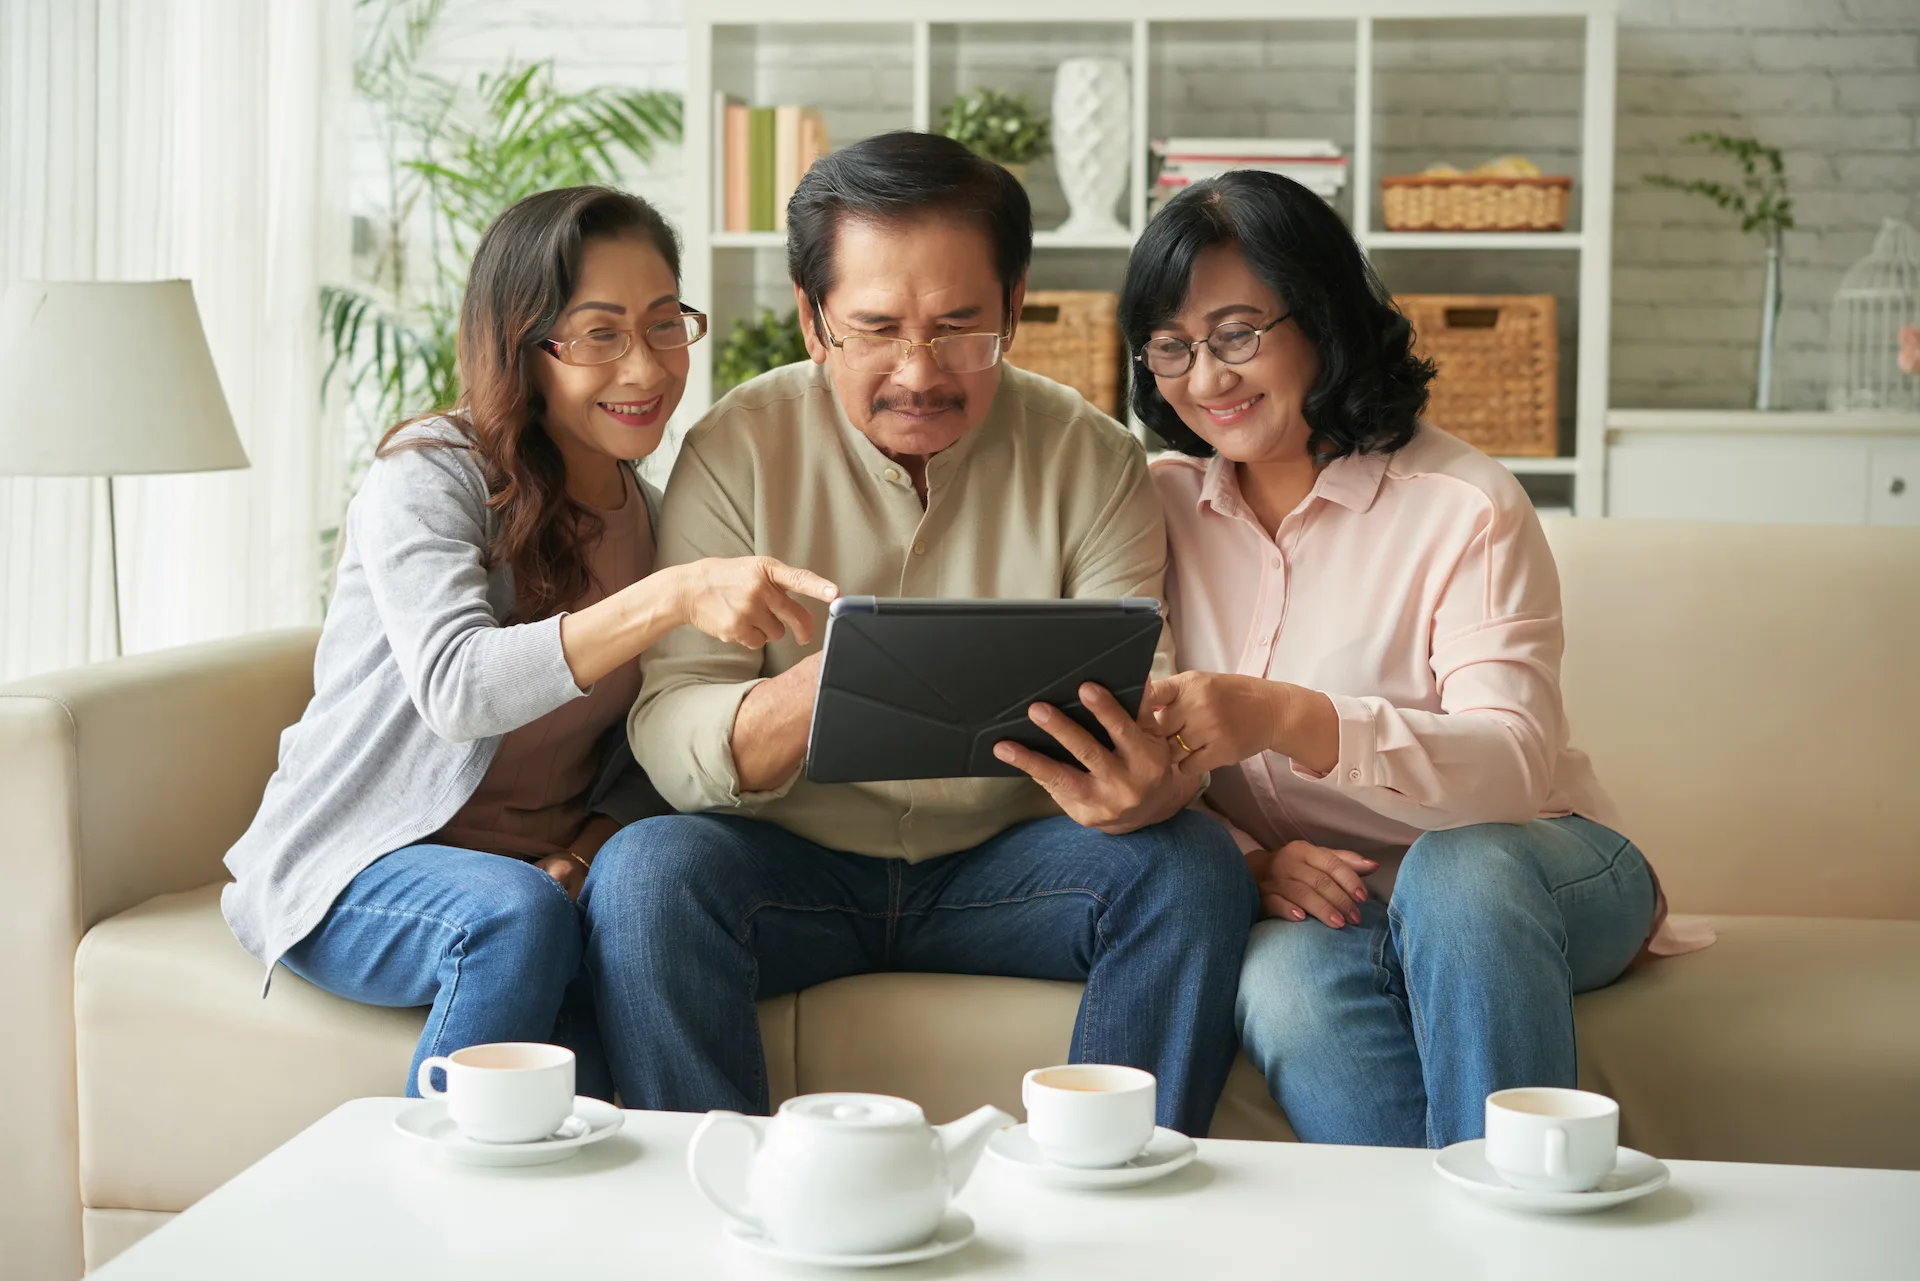 Three elderly people sitting on a sofa, looking at a tablet and smiling, with cups of tea on the table in front of them.